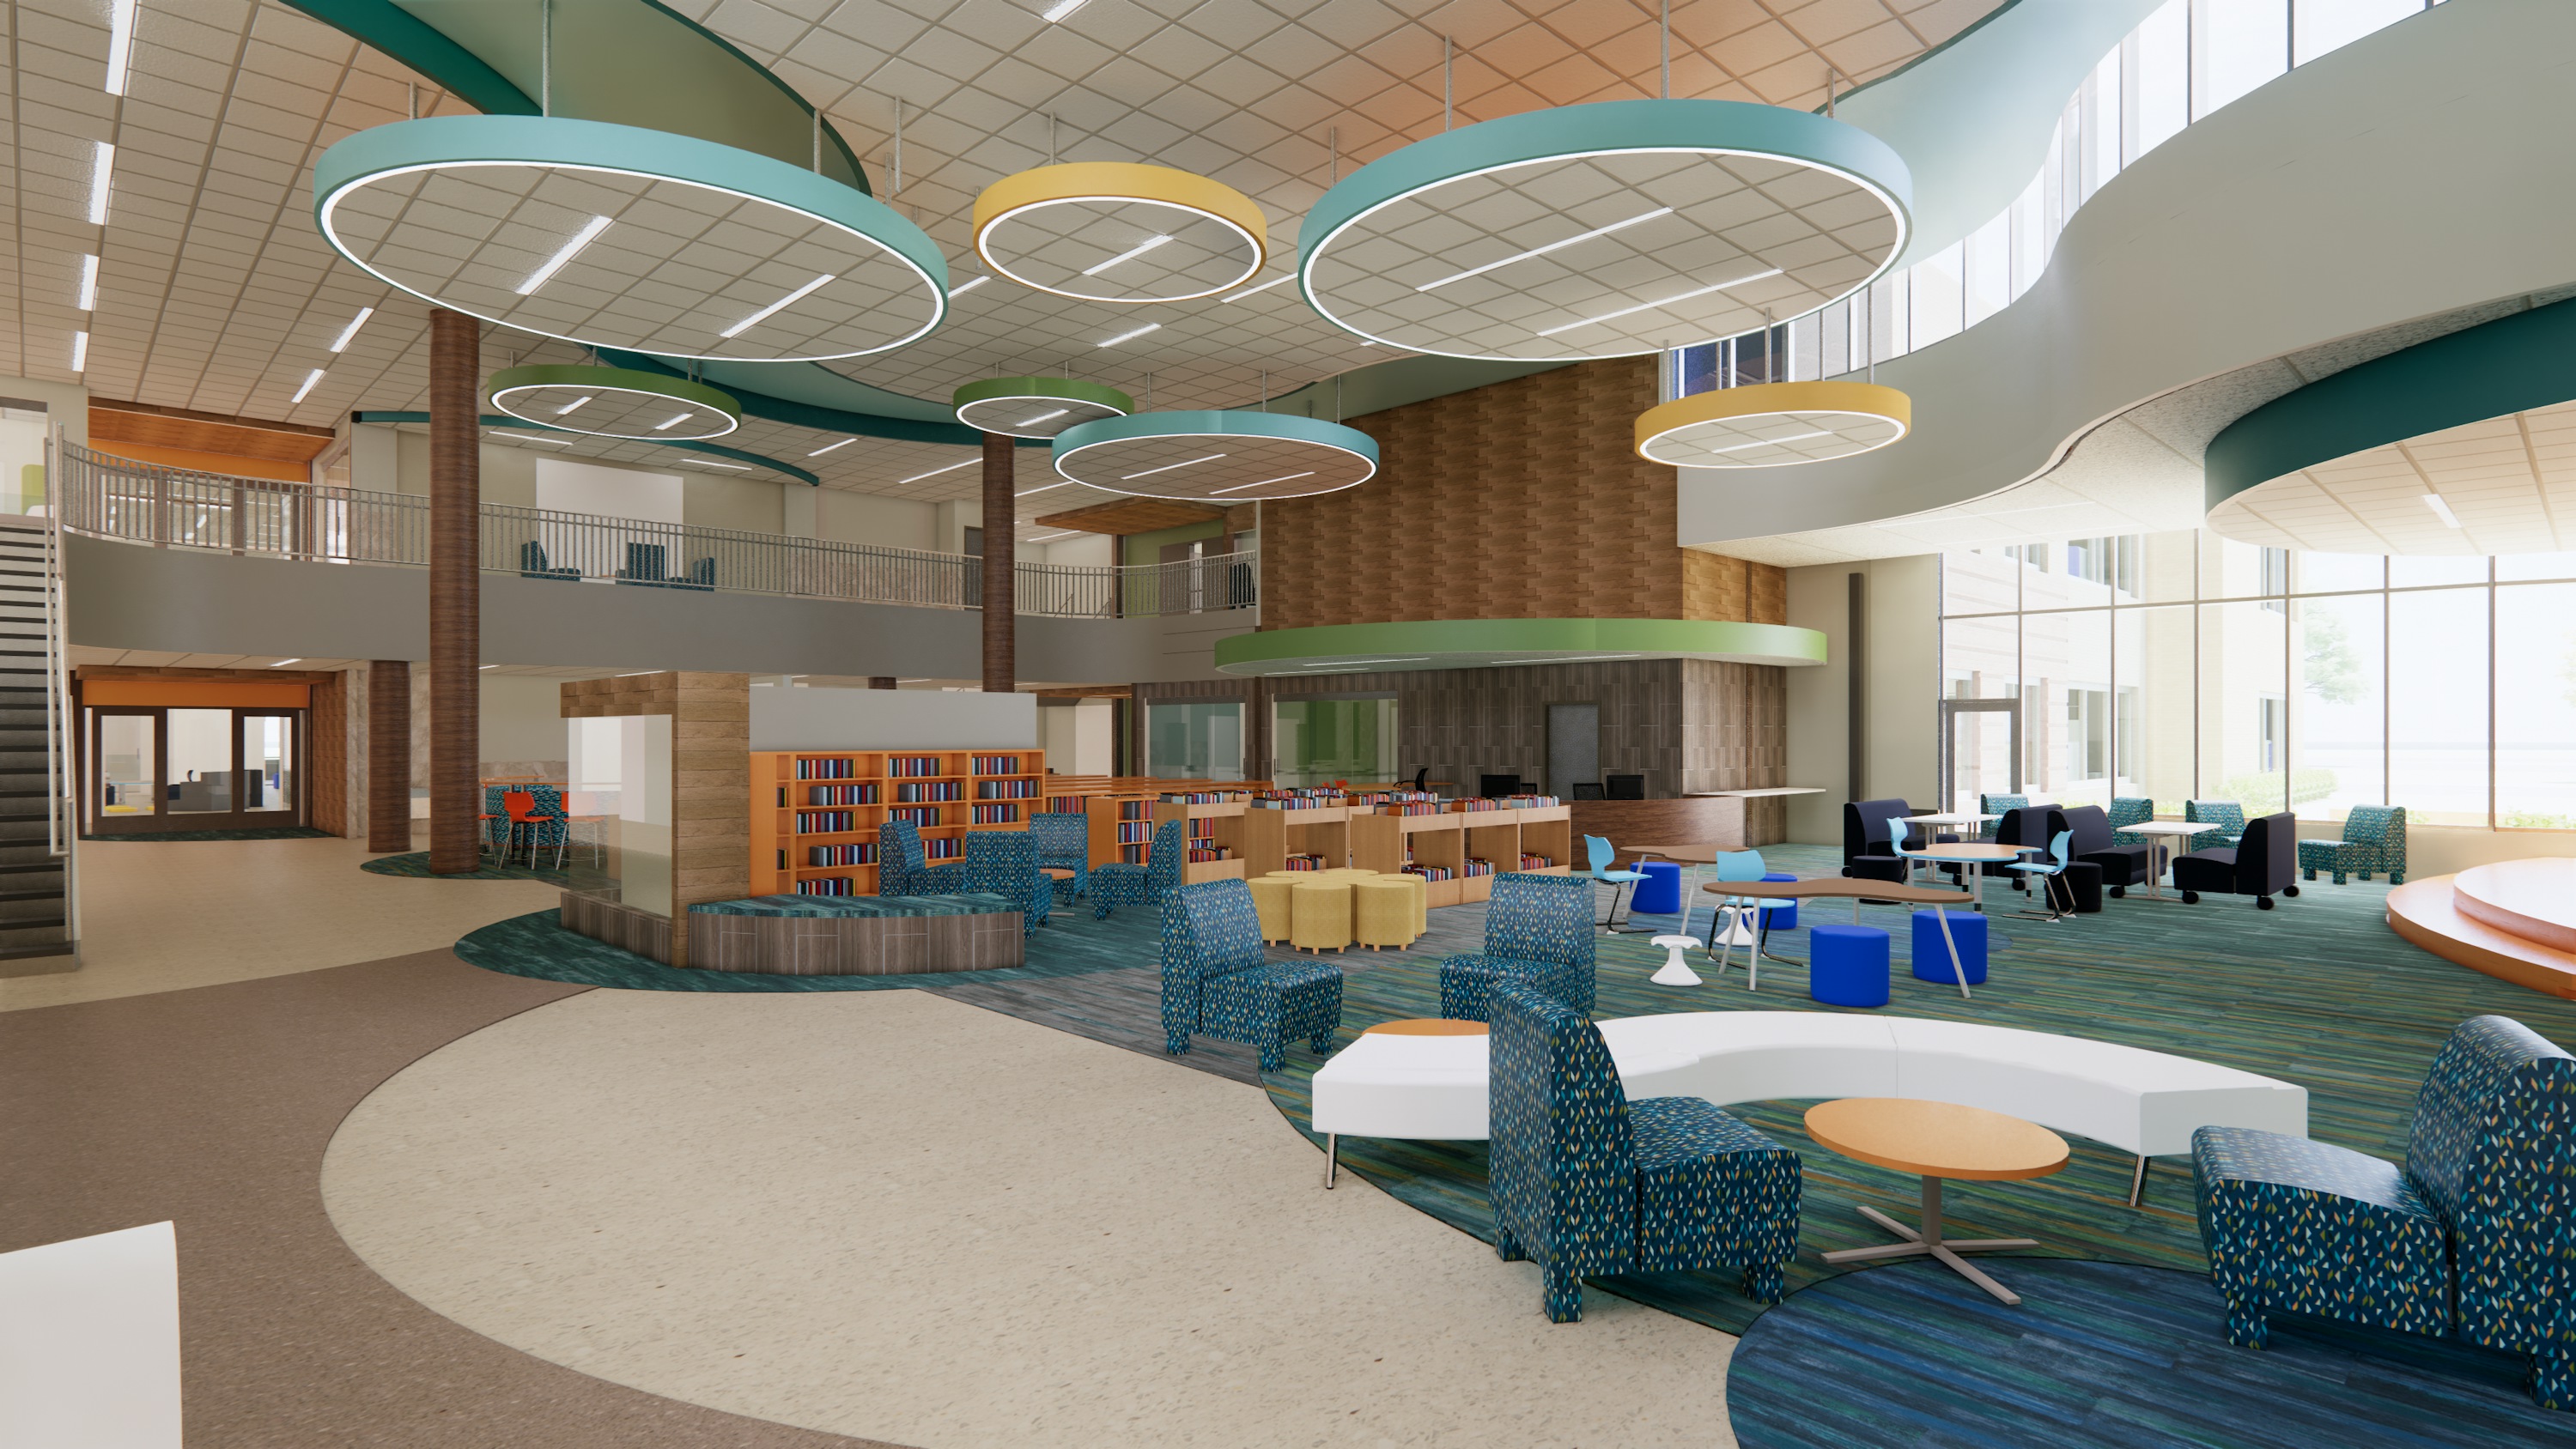 NEW ES LEARNING COMMONS